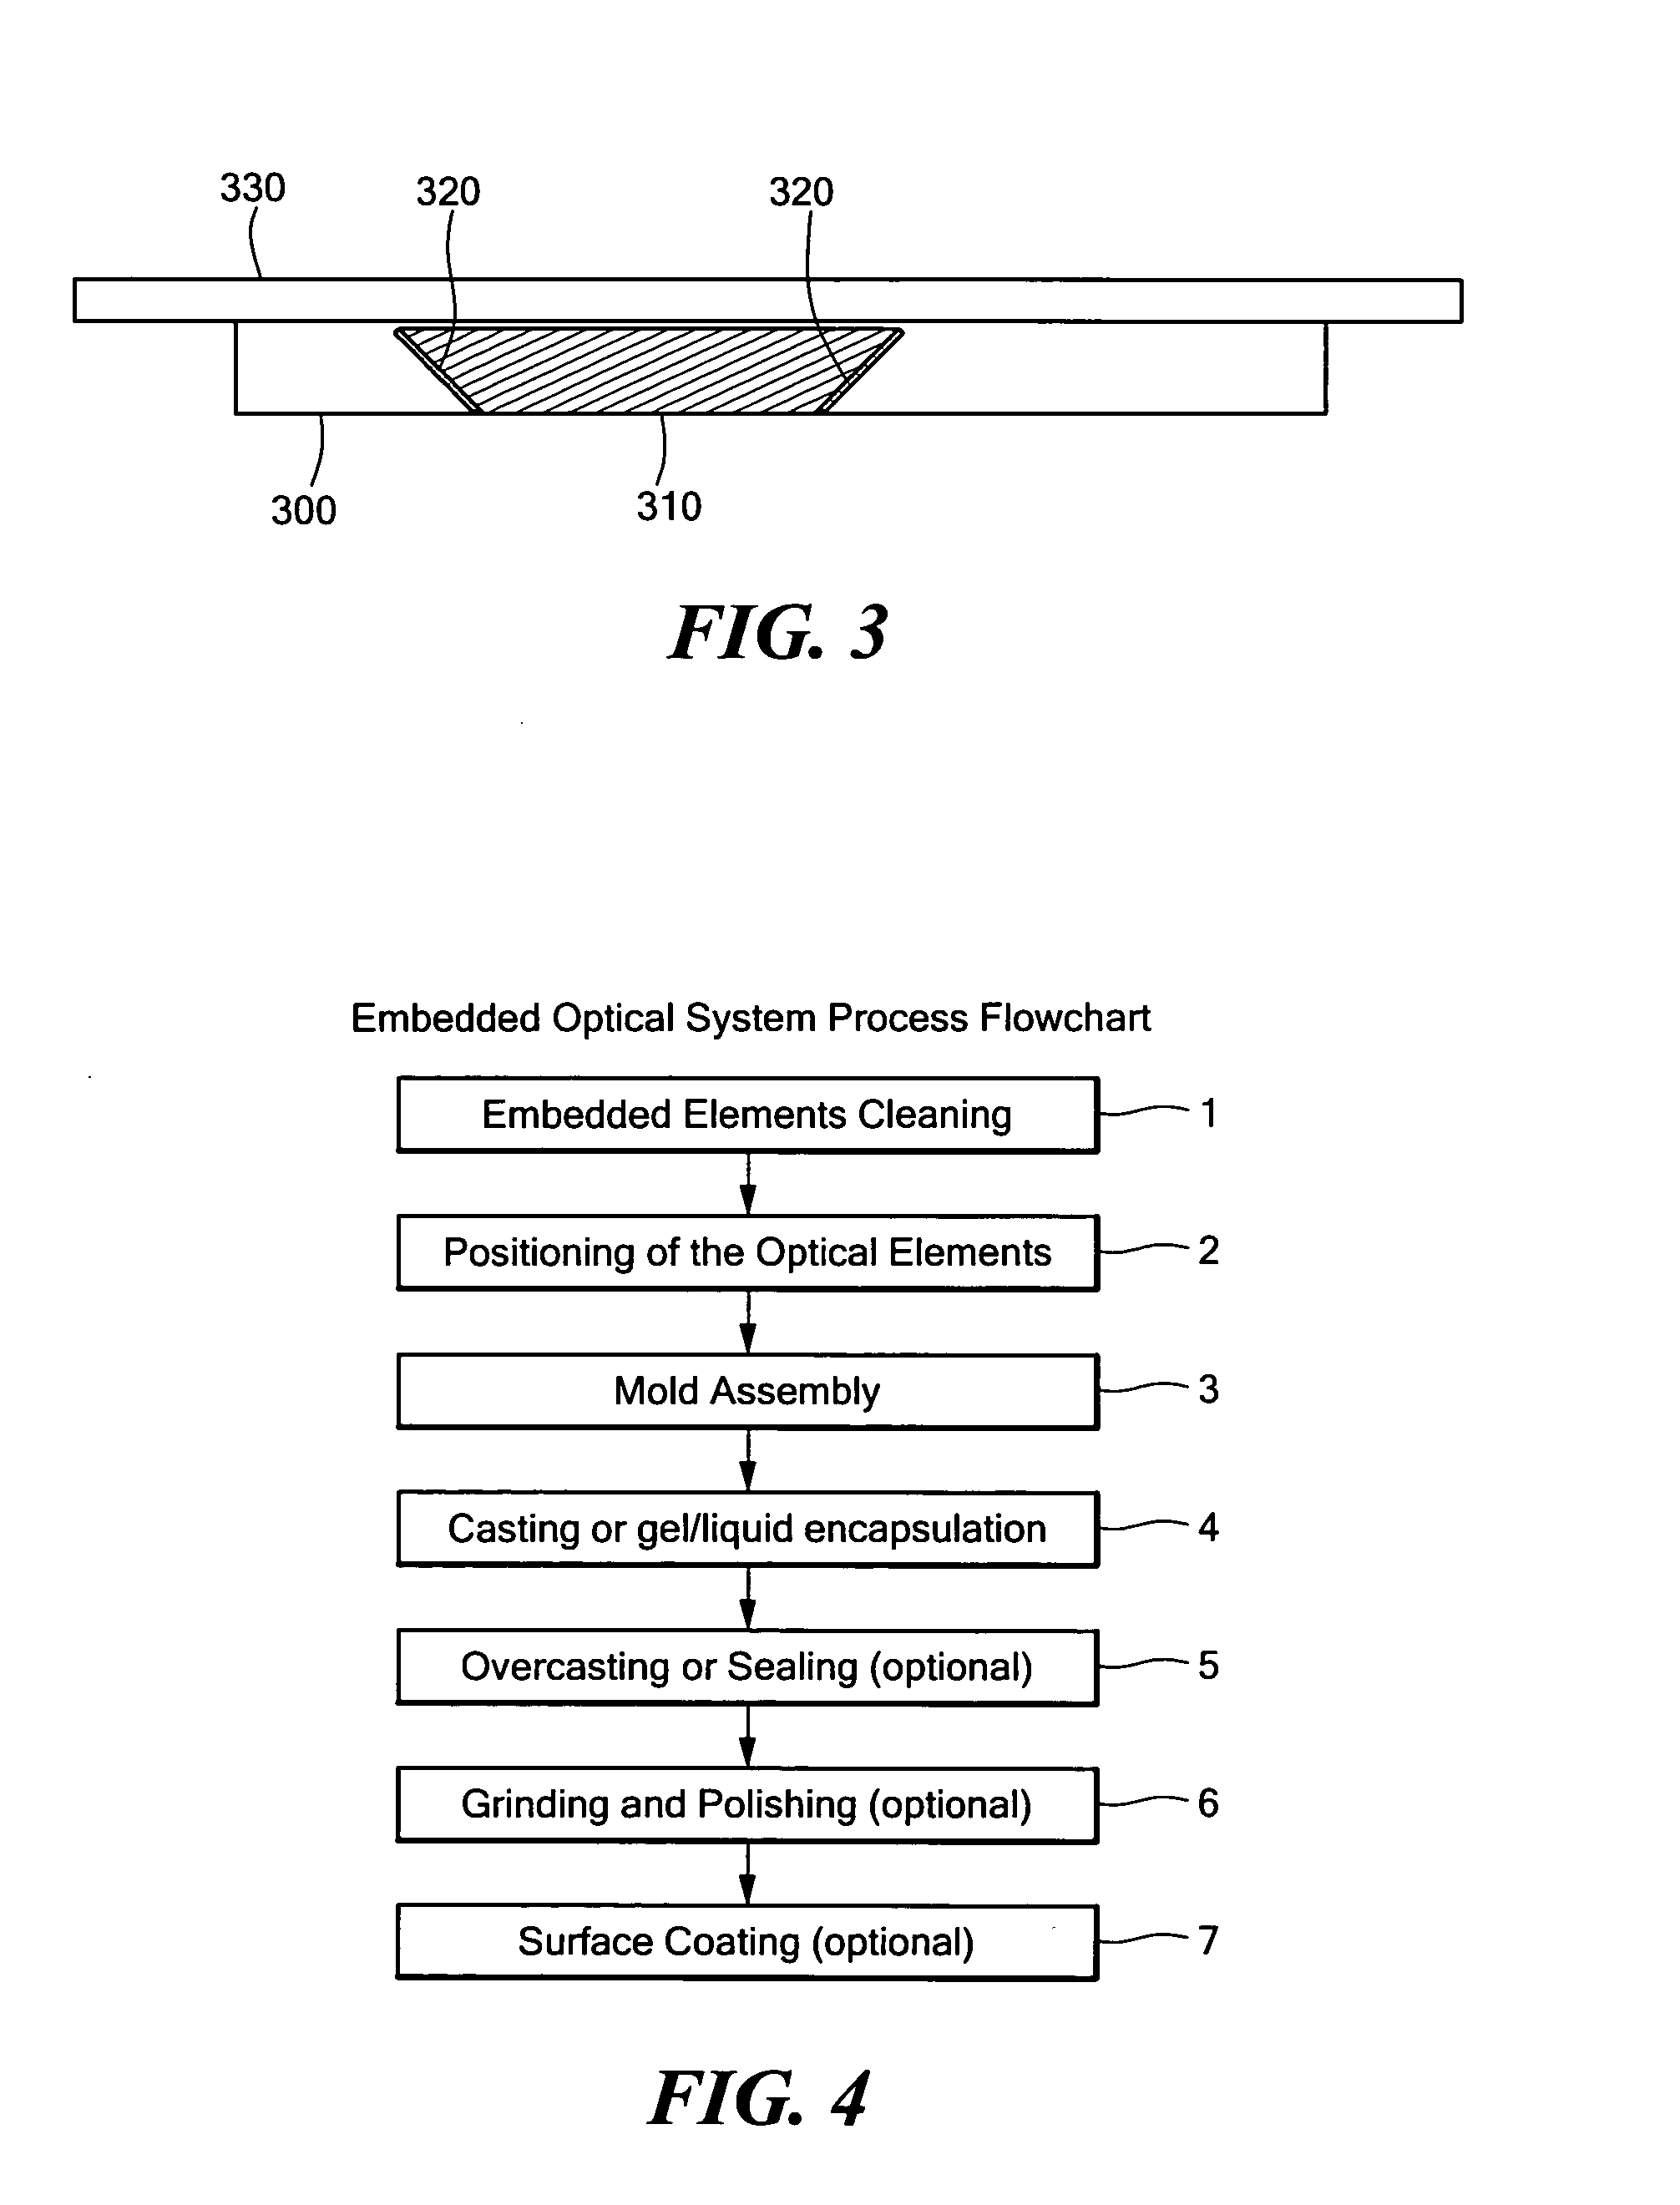 Manufacturing methods for embedded optical system